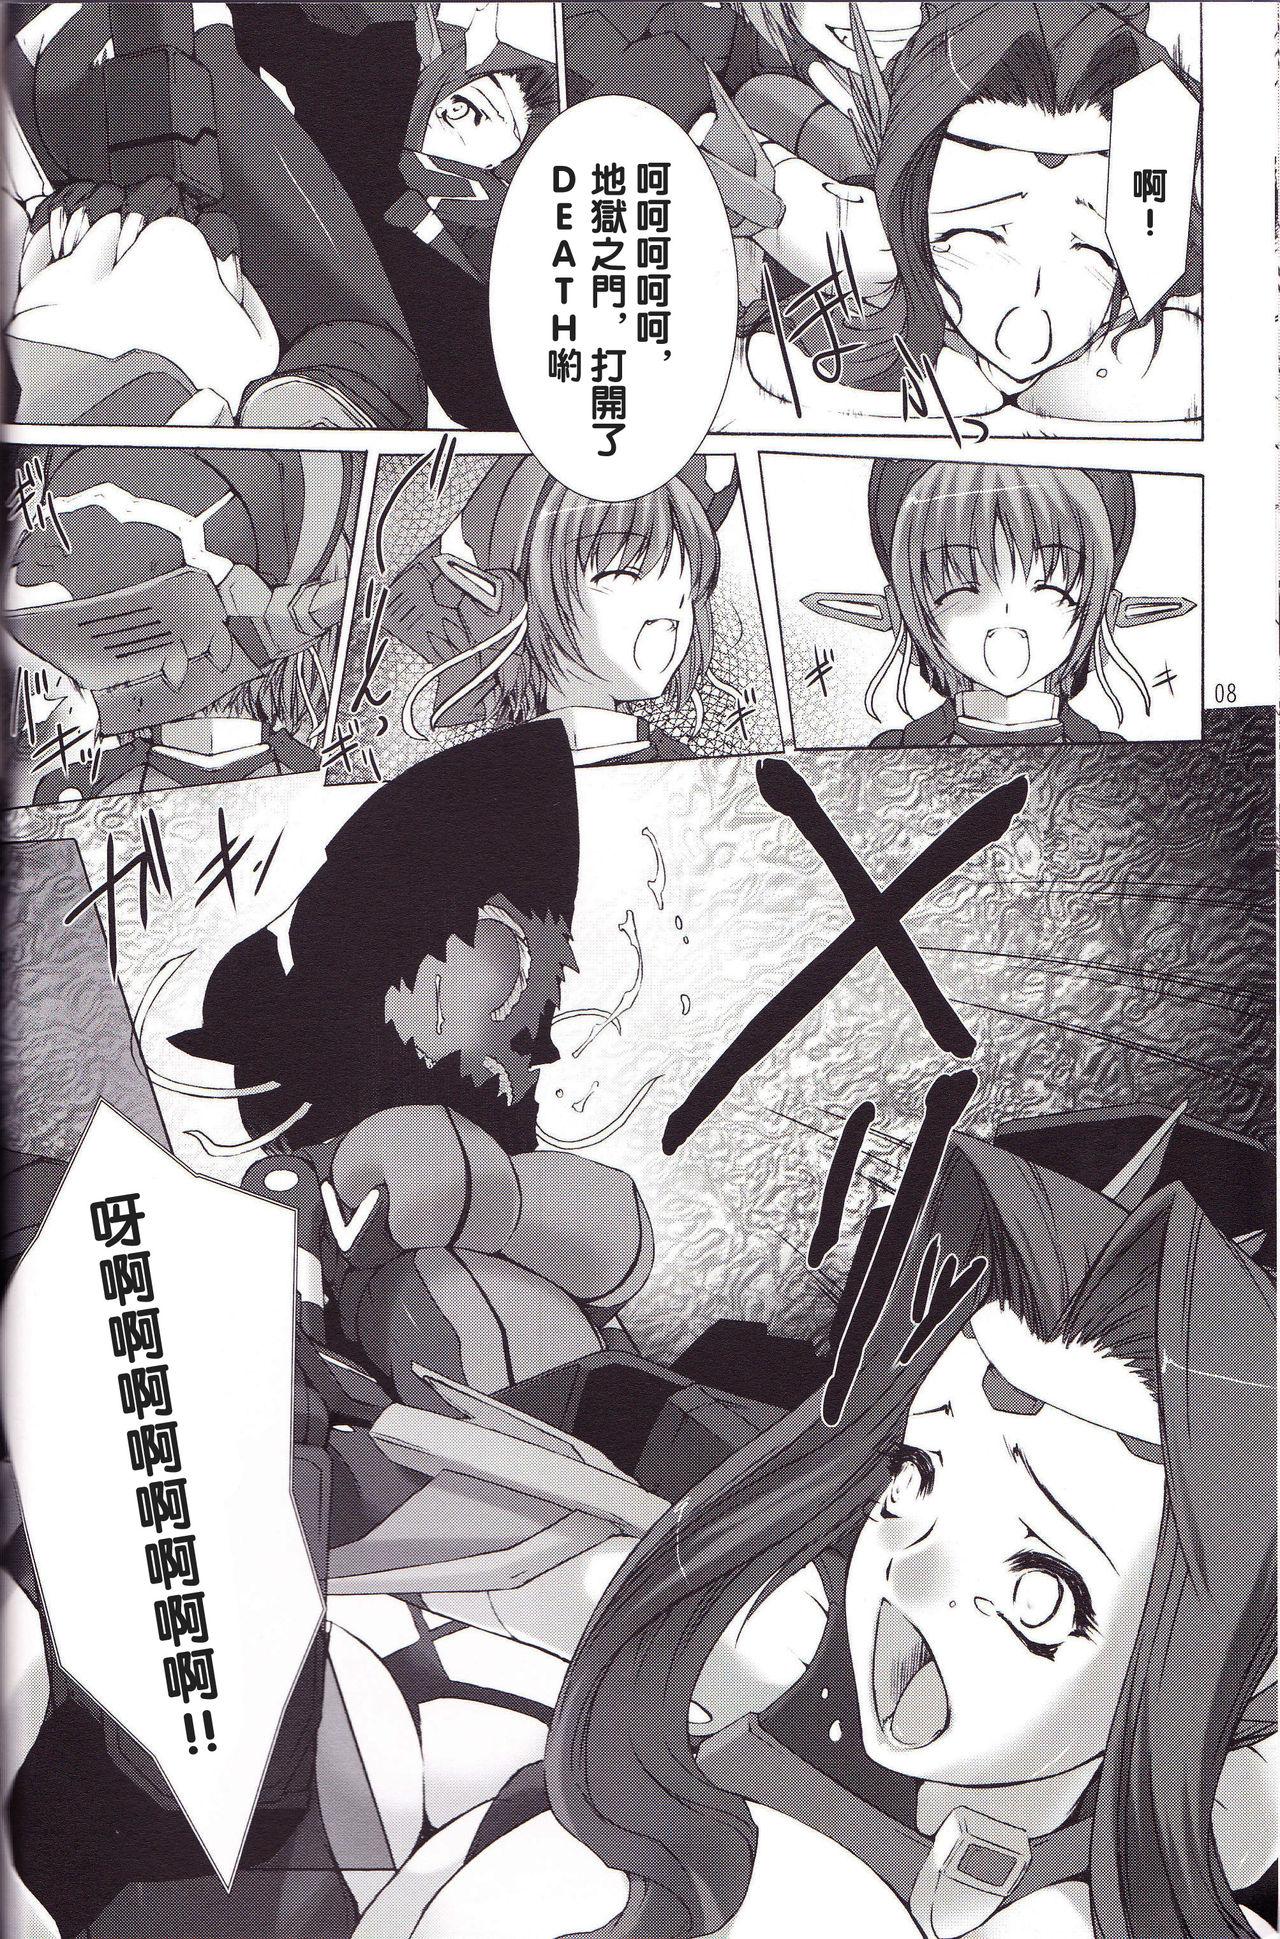 Lima Great Old One in the Pocket - Busou shinki Chick - Page 9